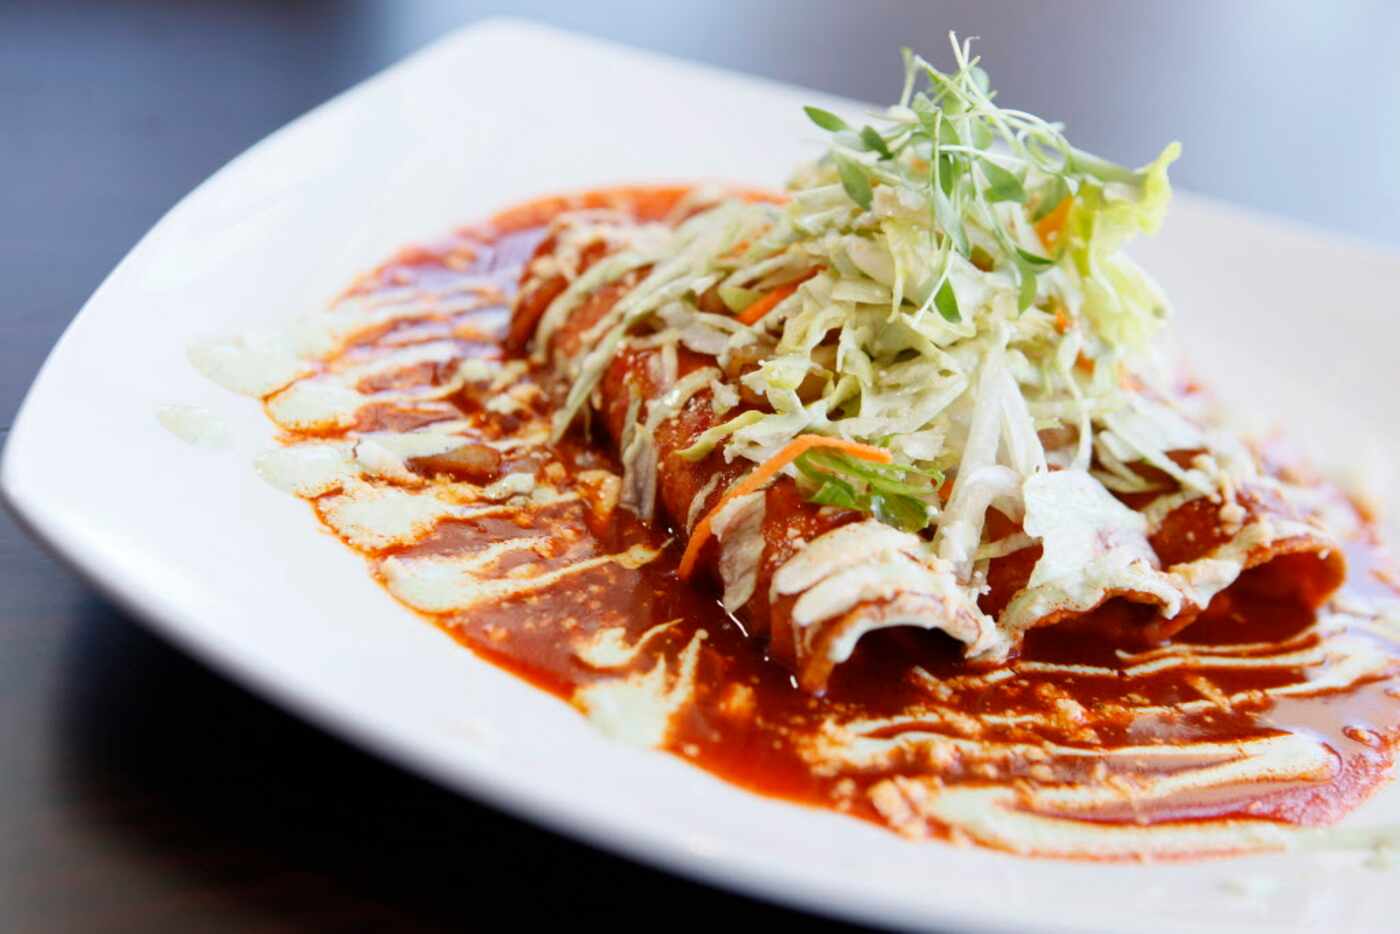 Enchiladas rojas with guajillo, queso fresco is among featured items at Cafe Herrera...